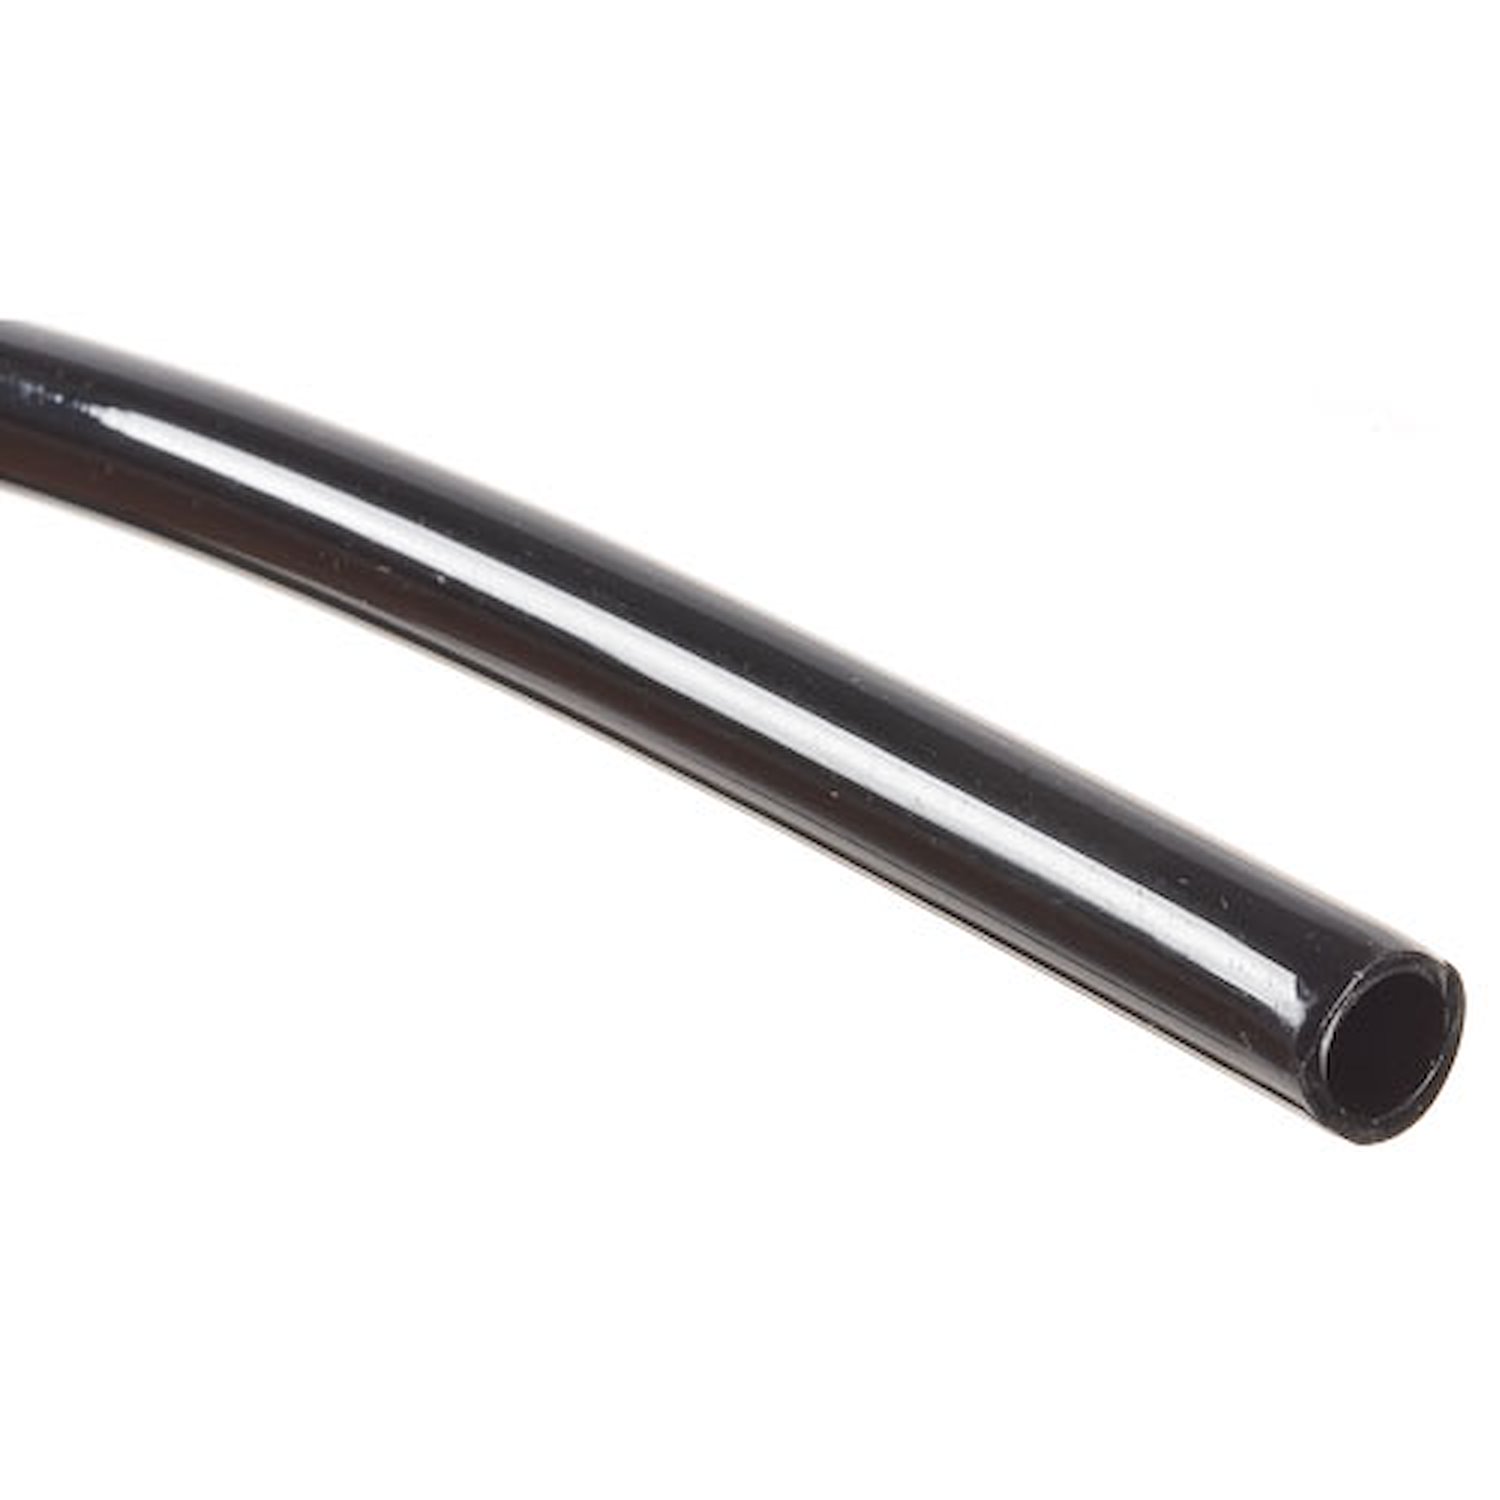 Nylon Fuel Injection Tubing [5/16 in. O.D. x 10 ft.]